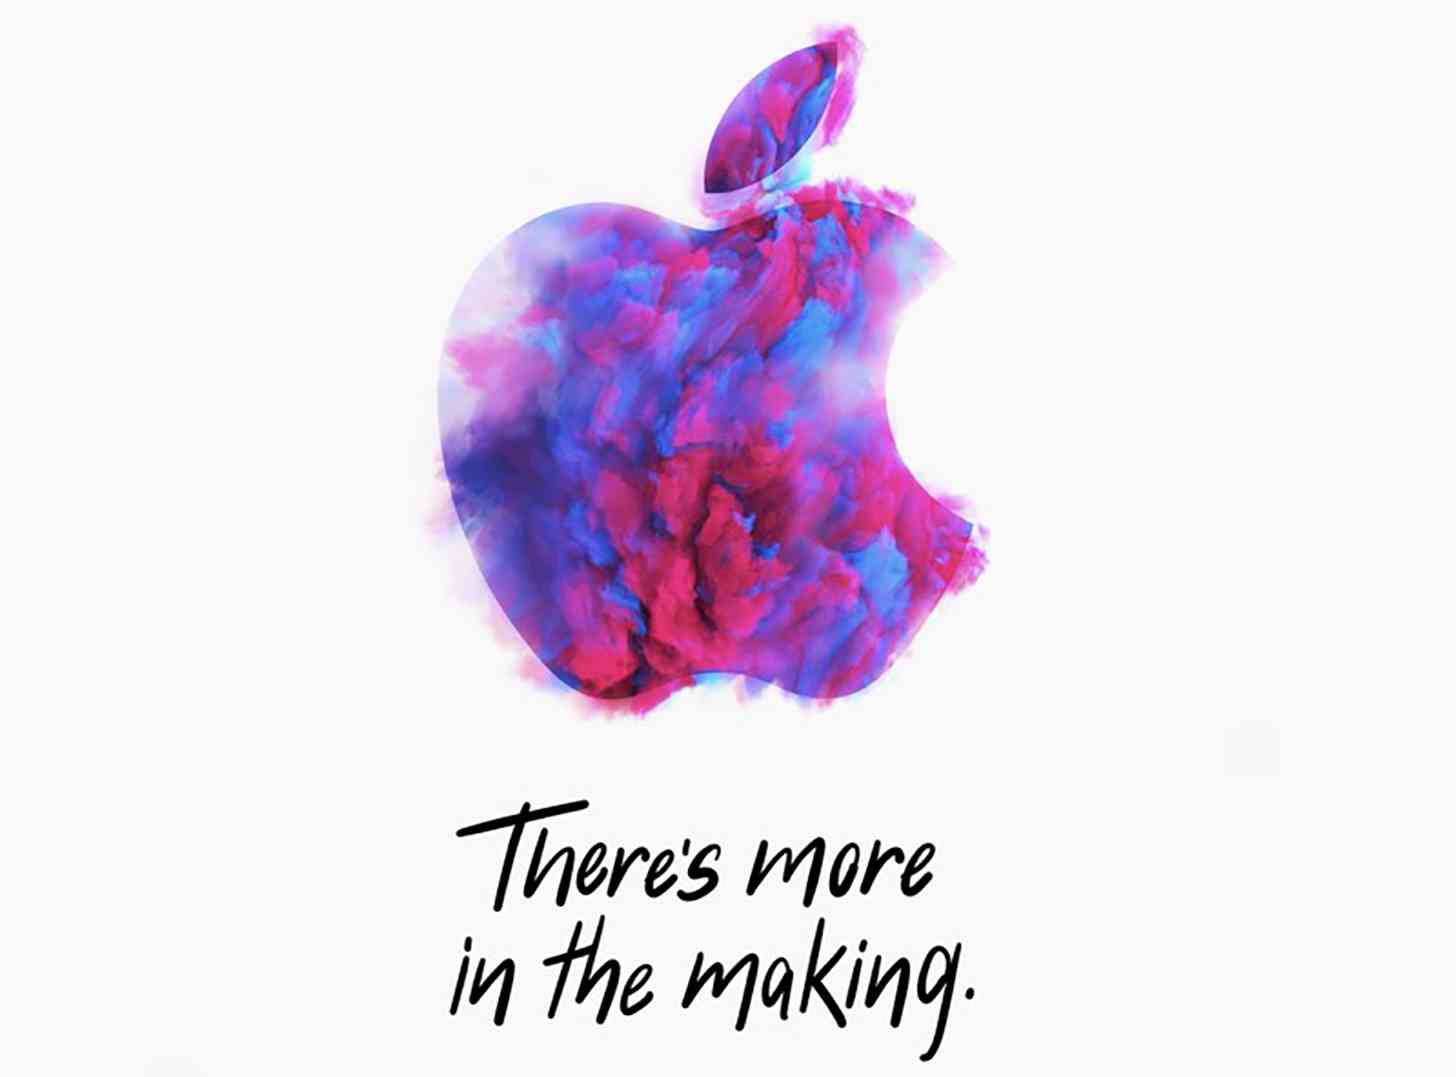 Apple event October 30th invitation There's More in the Making